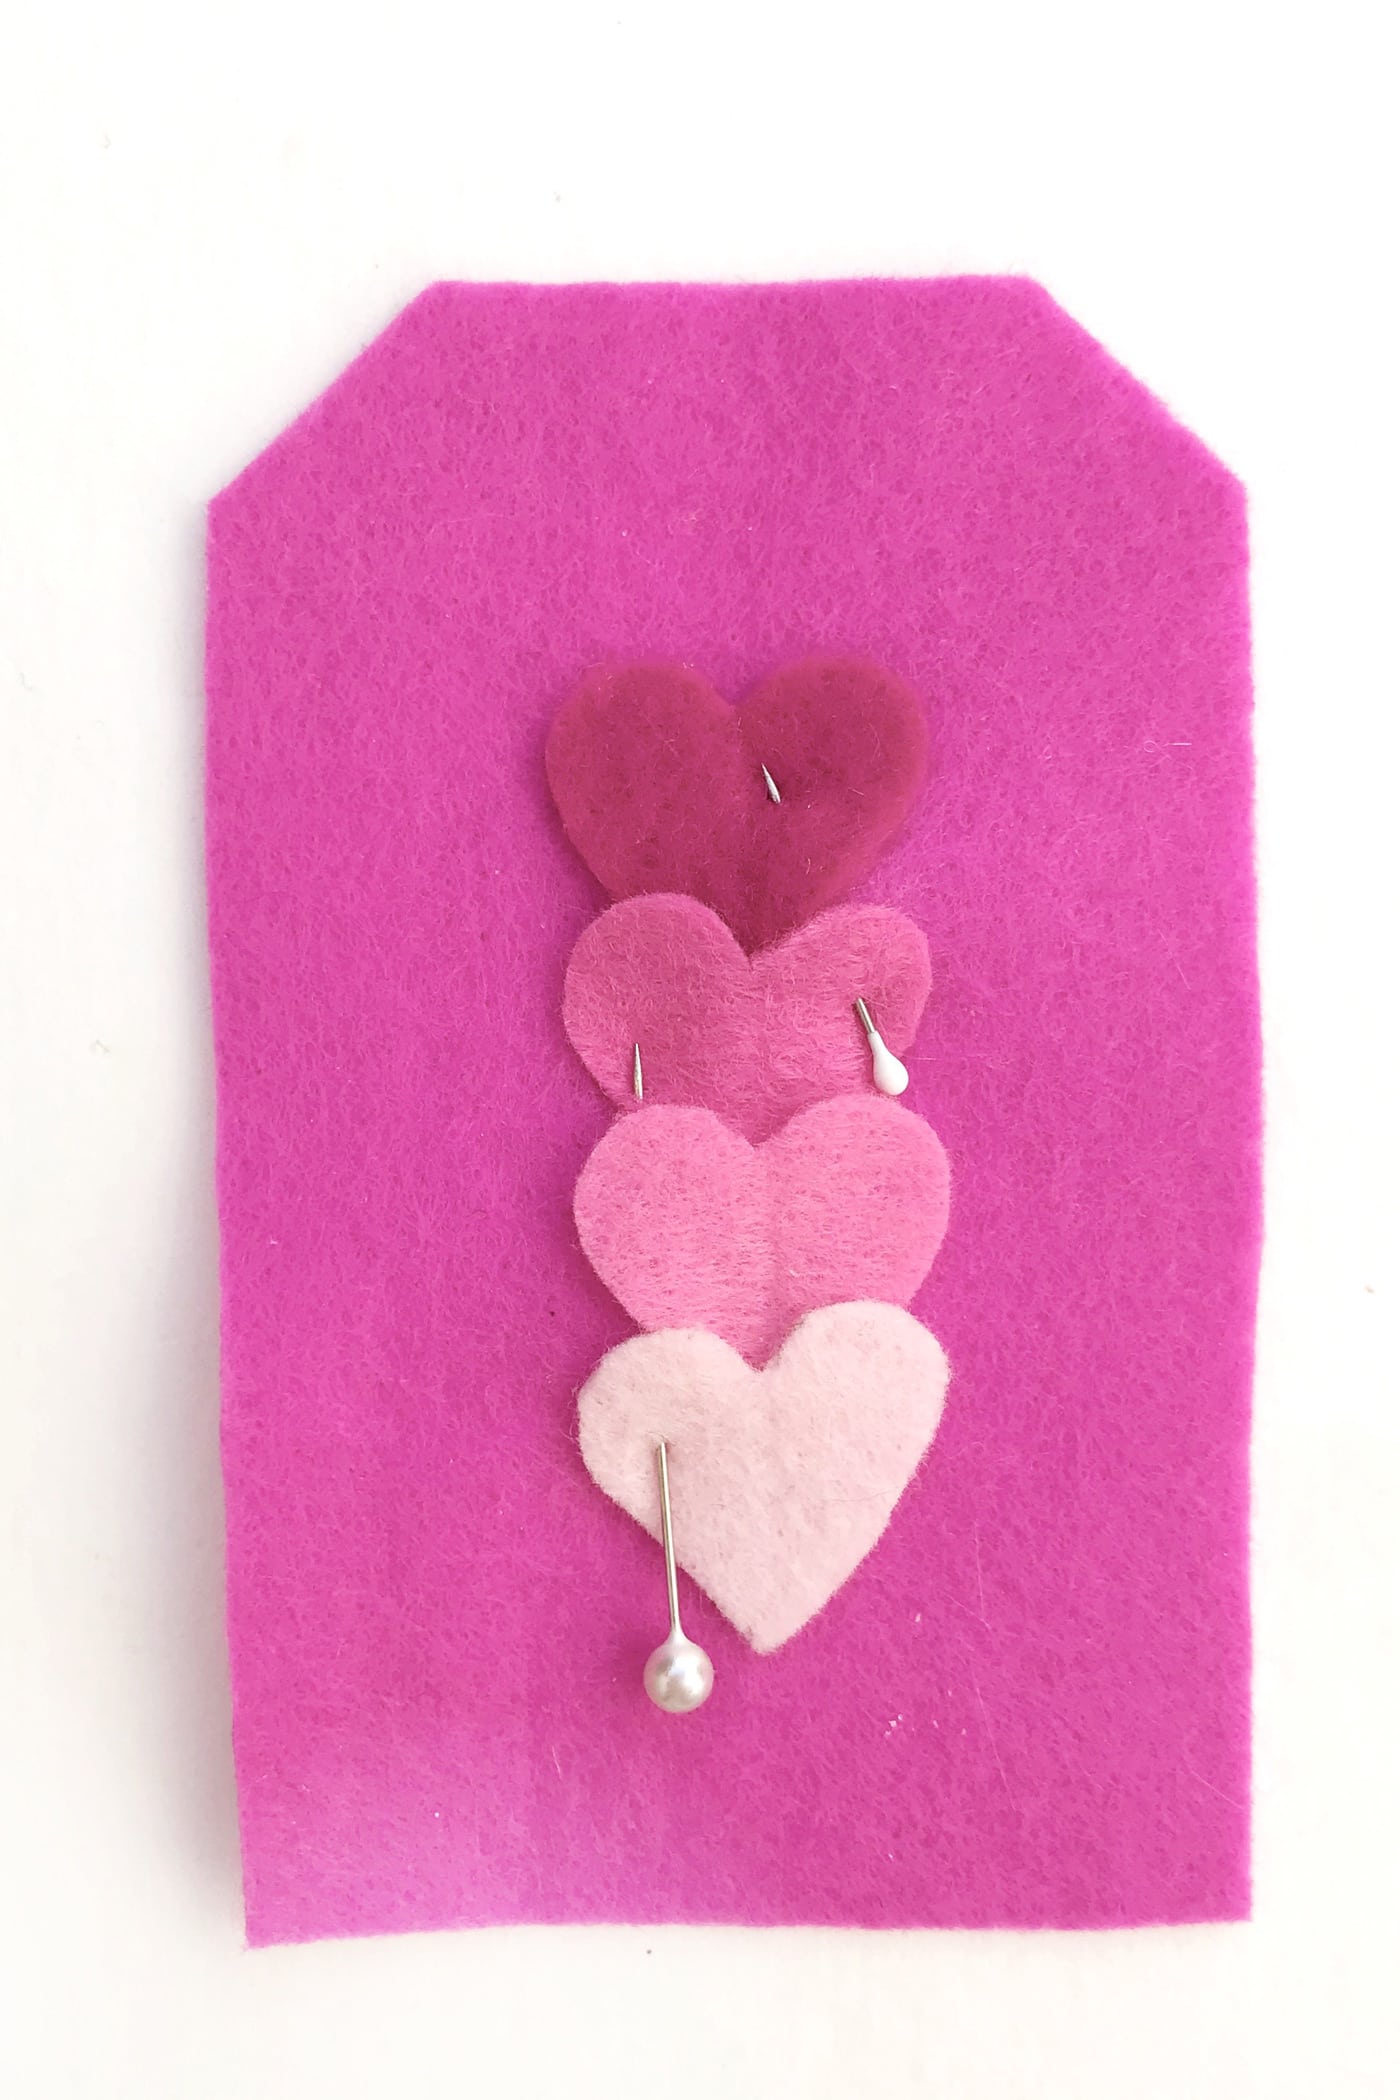 hand embroidered felt gift tags on white table with hearts pinned on